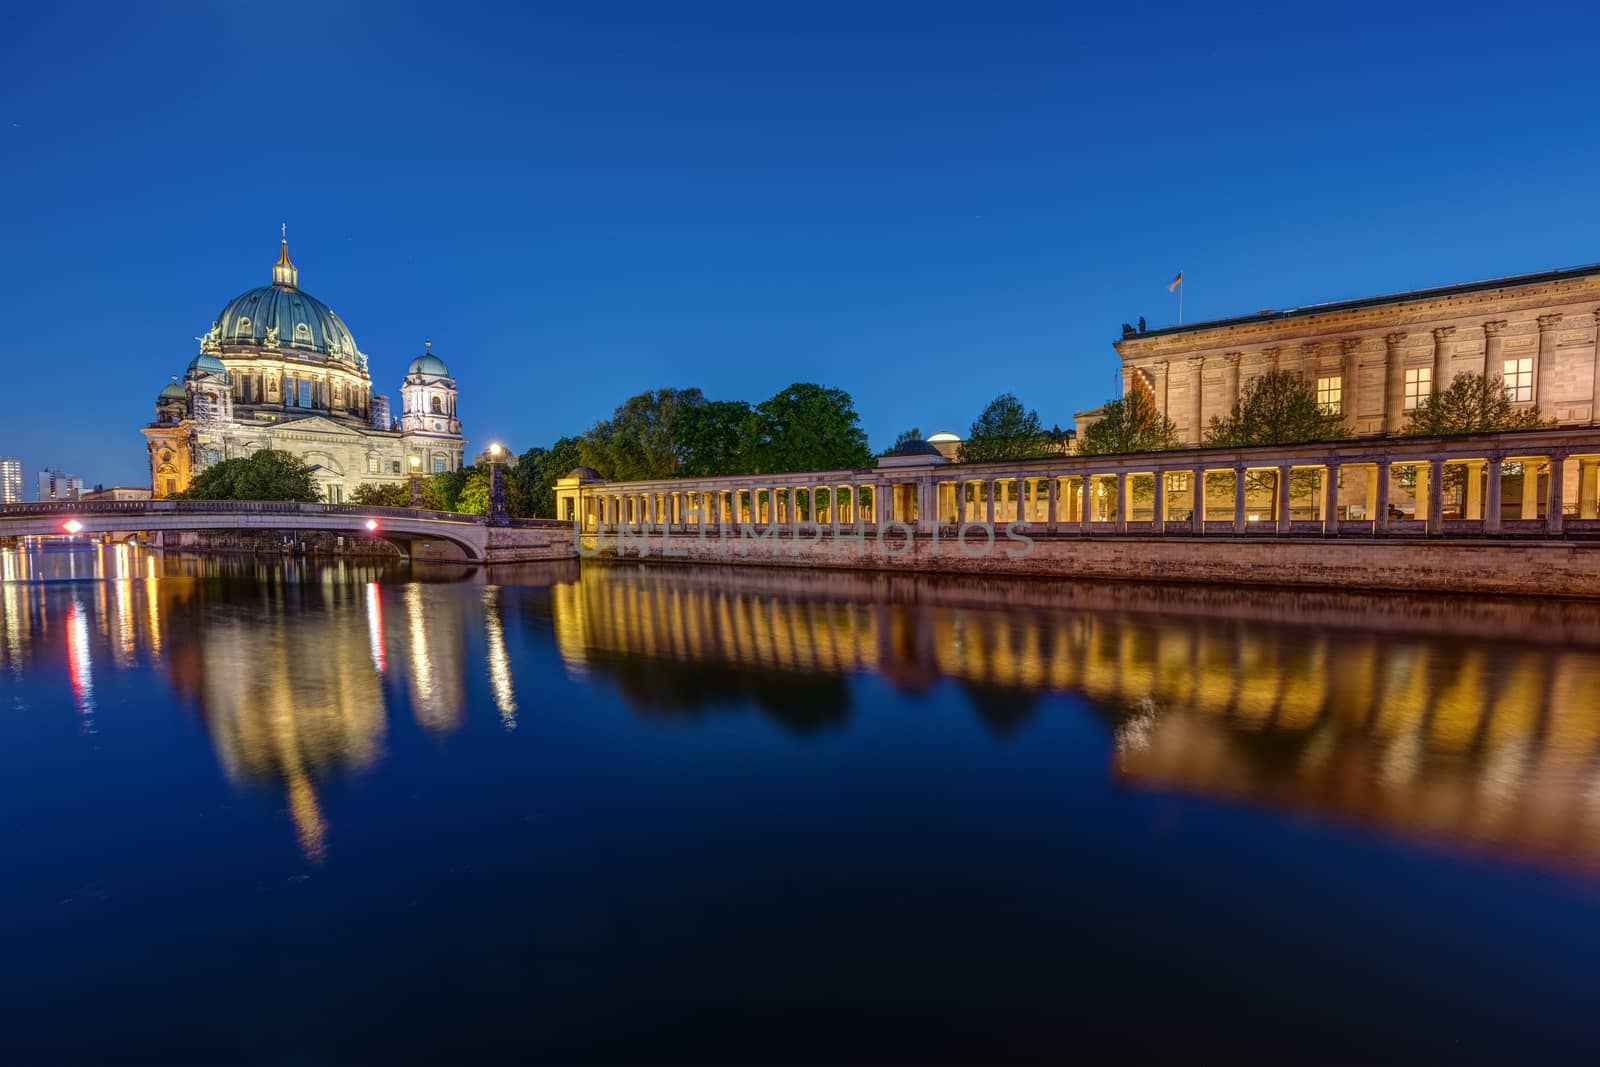 The Berlin Cathedral and the Old National Gallery on the Museum Island in Berlin at night